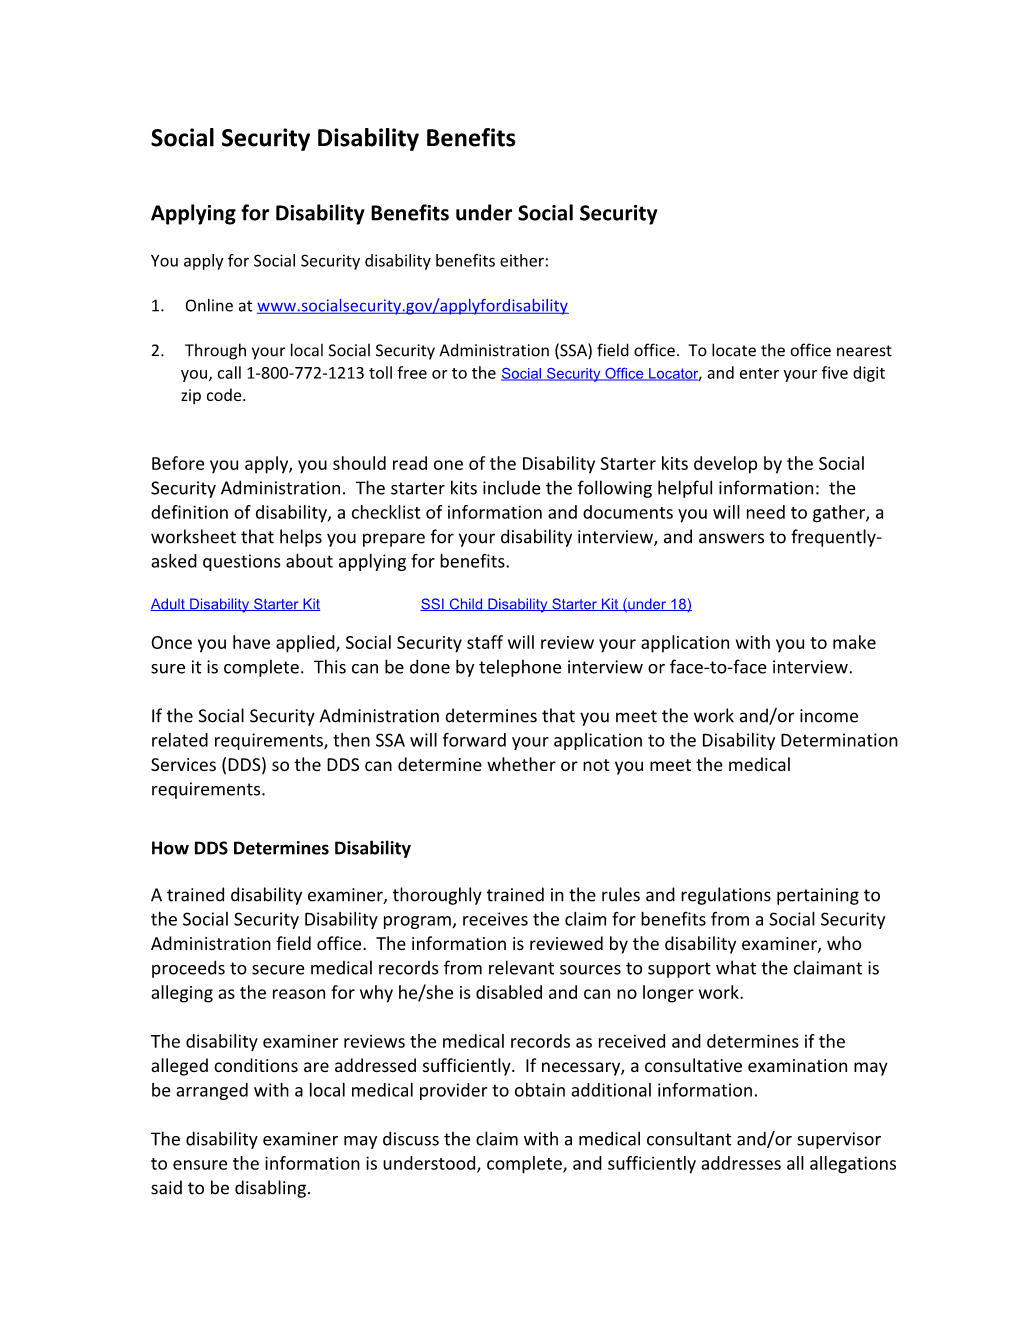 Applying for Disability Benefits Under Social Security